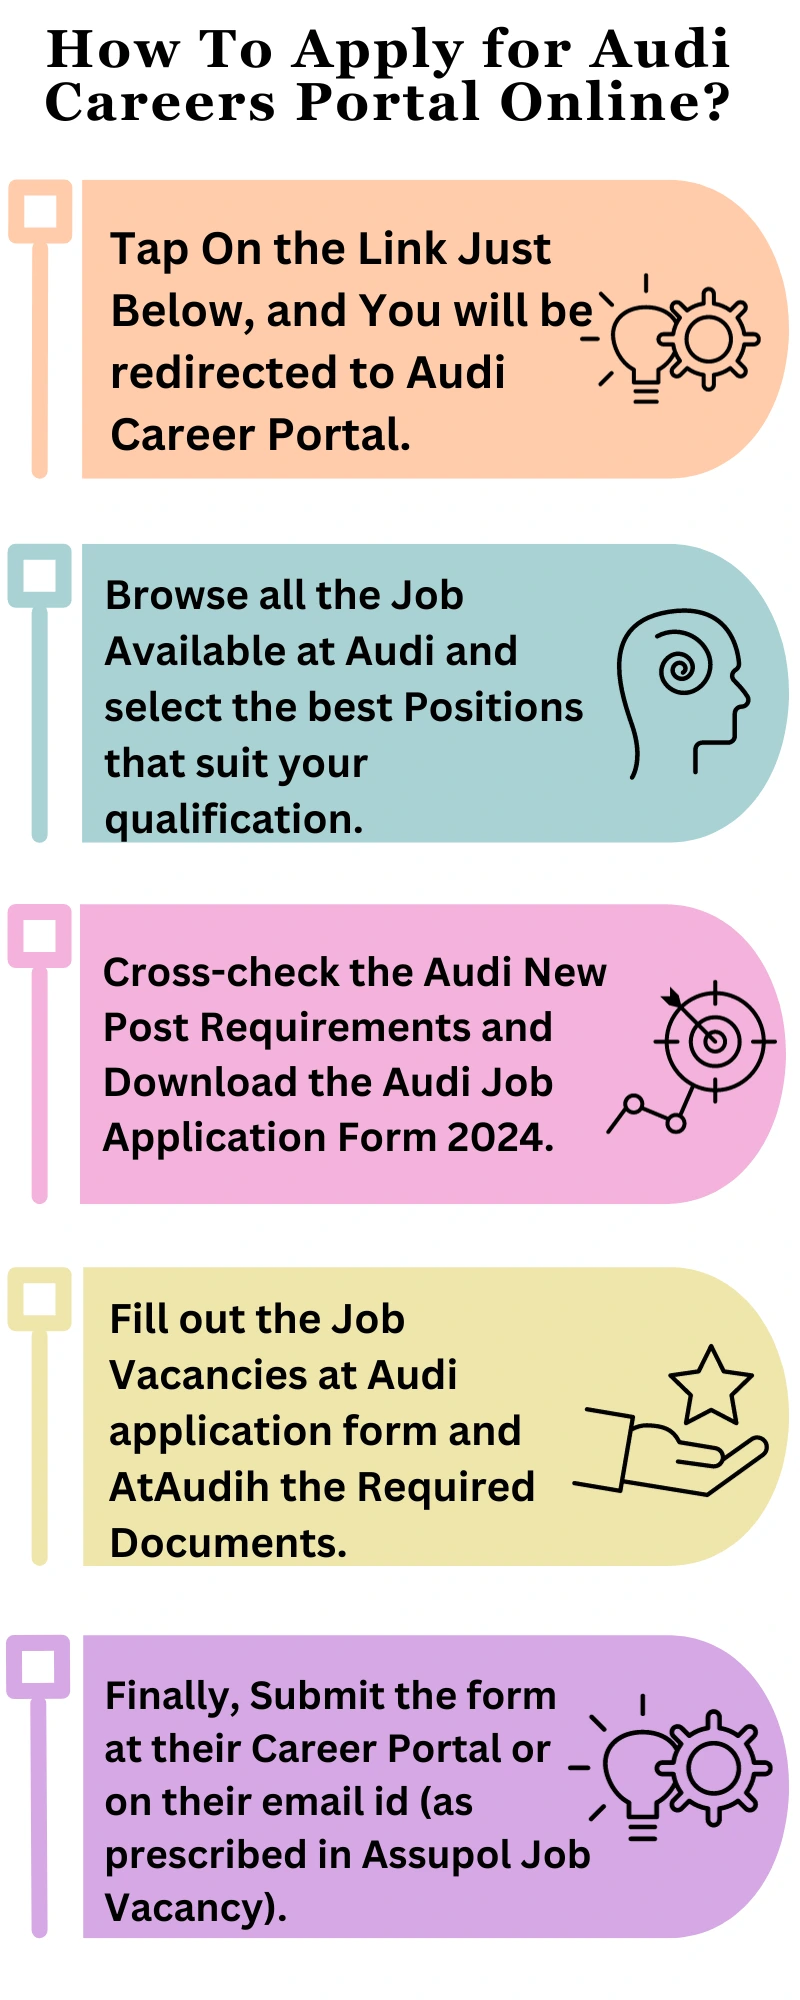 How To Apply for Audi Careers Portal Online?